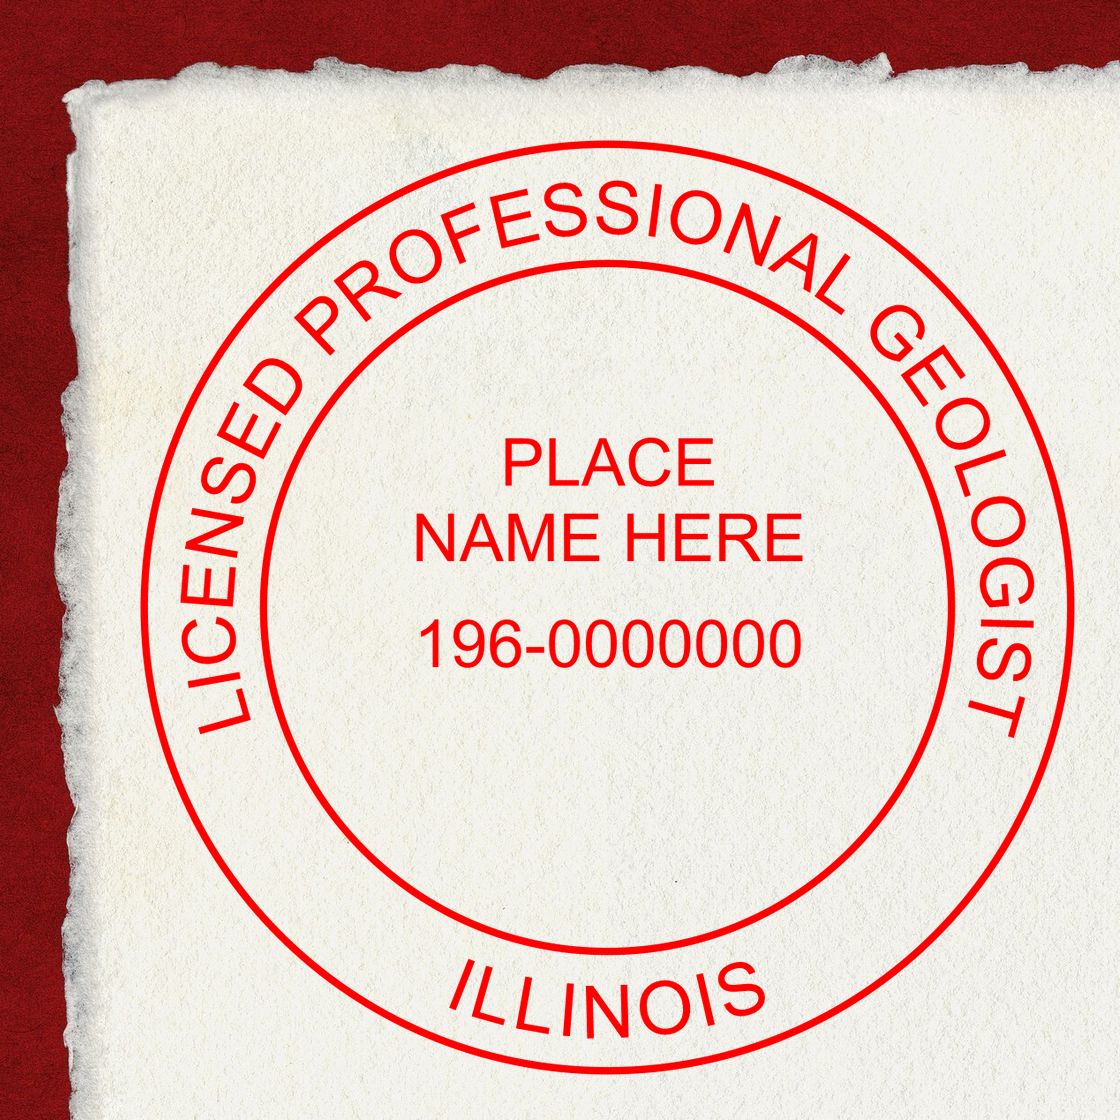 A lifestyle photo showing a stamped image of the Illinois Professional Geologist Seal Stamp on a piece of paper